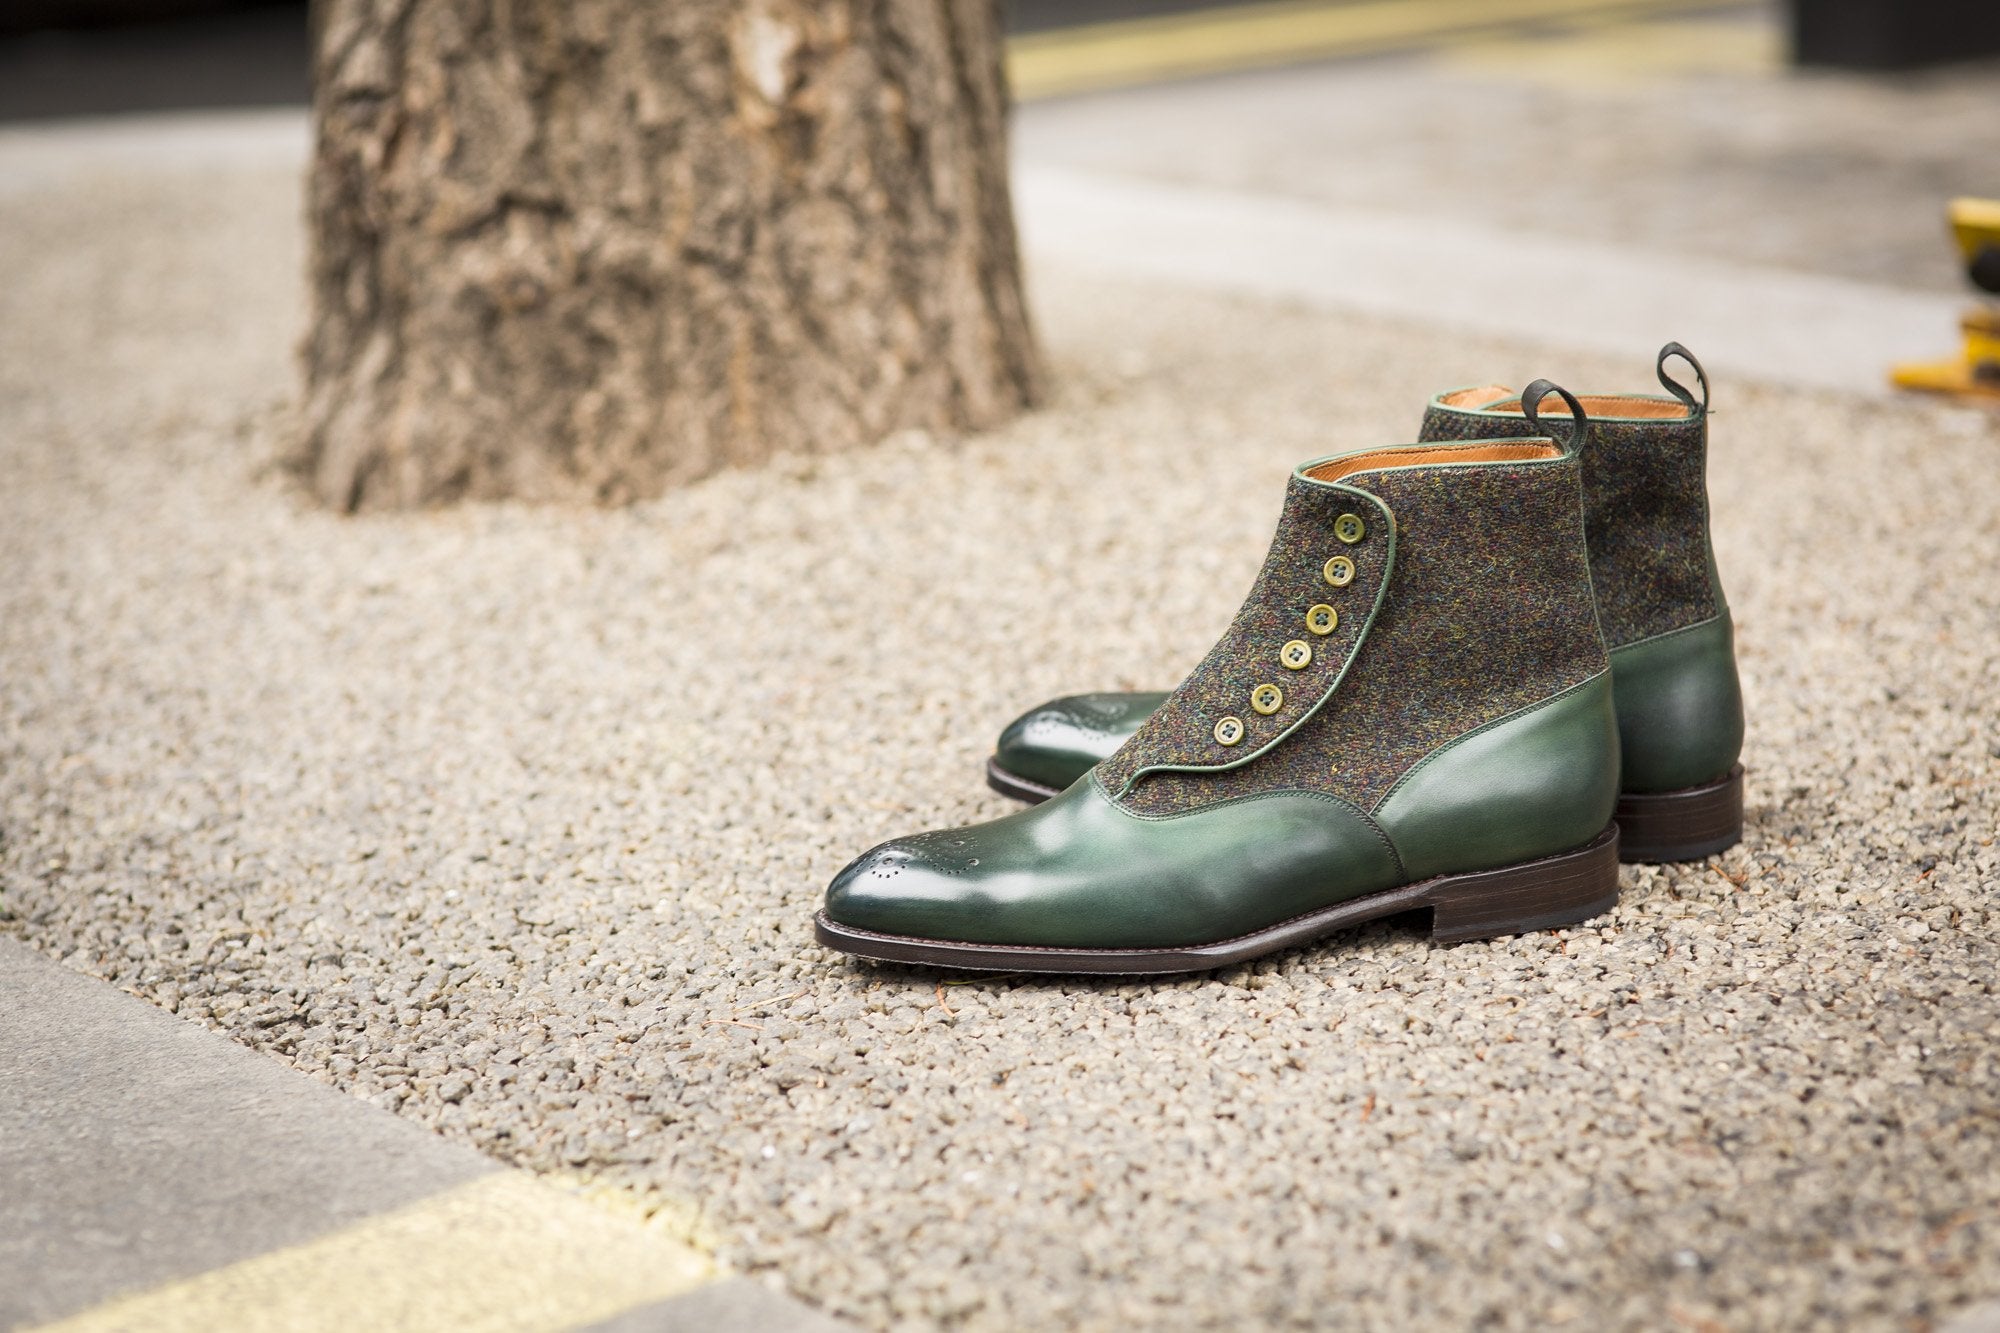 Westlake - MTO - Forest Green Calf / Moss Green Medley Tweed - NGT Last - Single Leather Sole